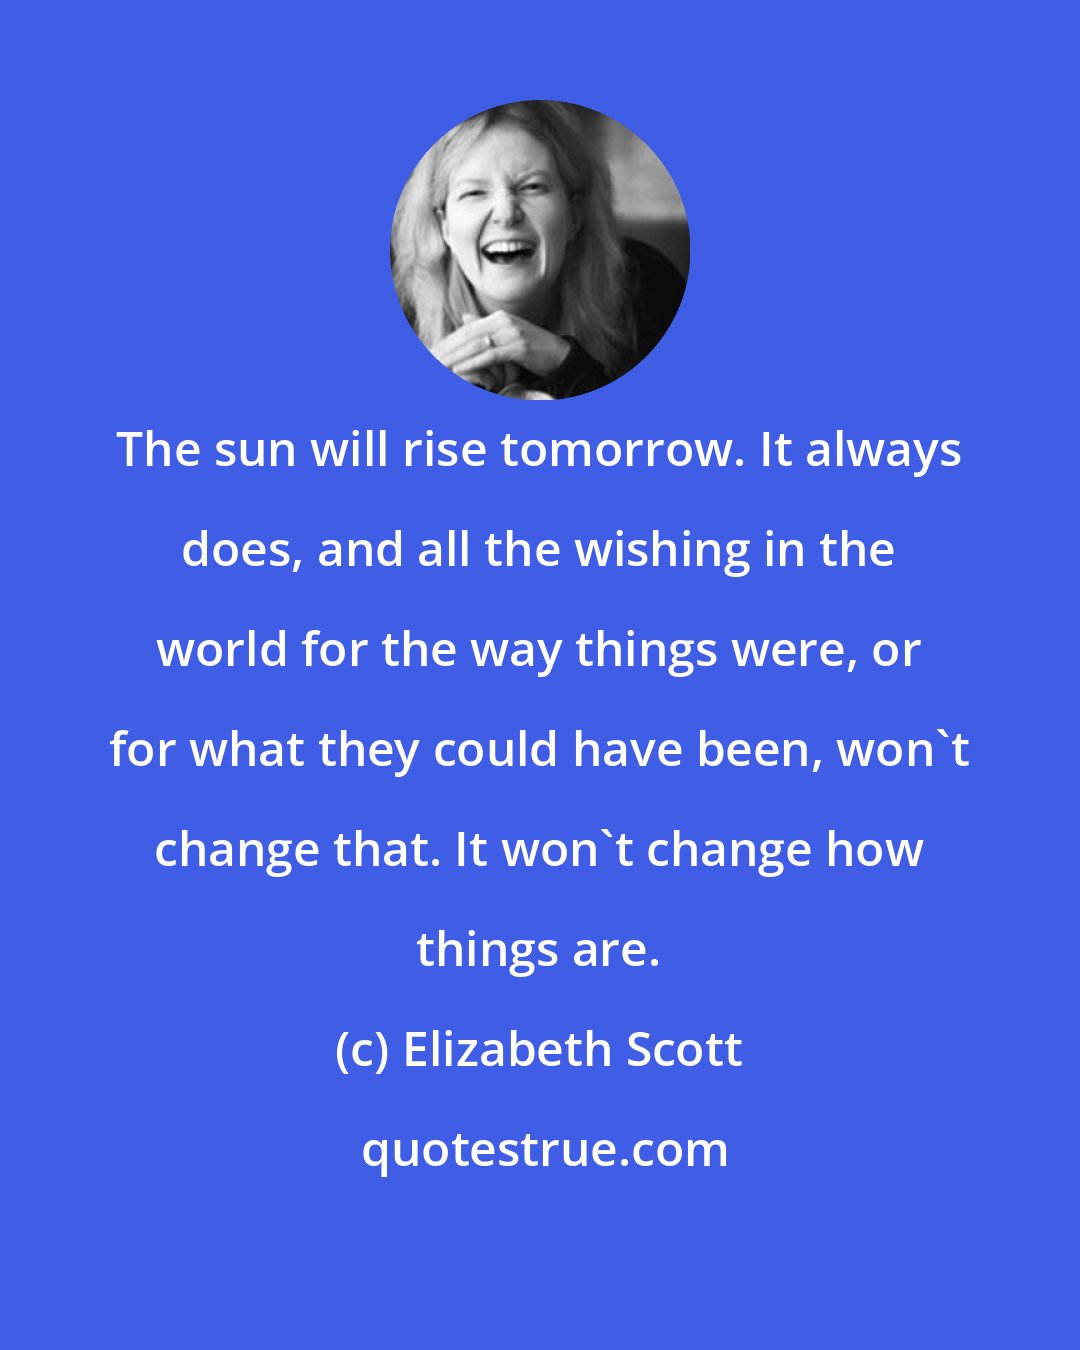 Elizabeth Scott: The sun will rise tomorrow. It always does, and all the wishing in the world for the way things were, or for what they could have been, won't change that. It won't change how things are.